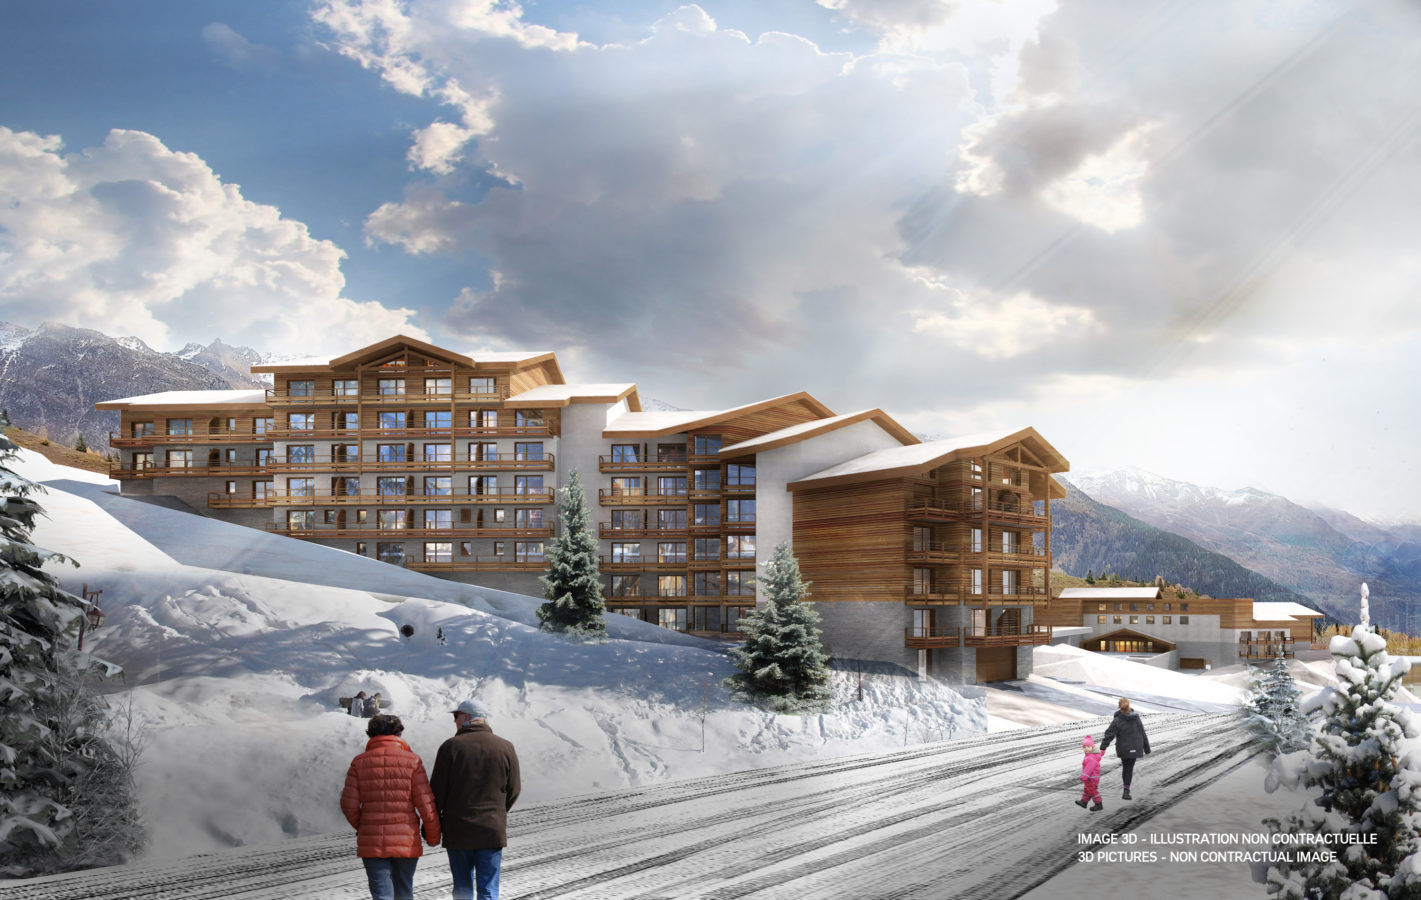 You Can Now Take a Virtual Tour of Club Med La Rosière in the French Alps